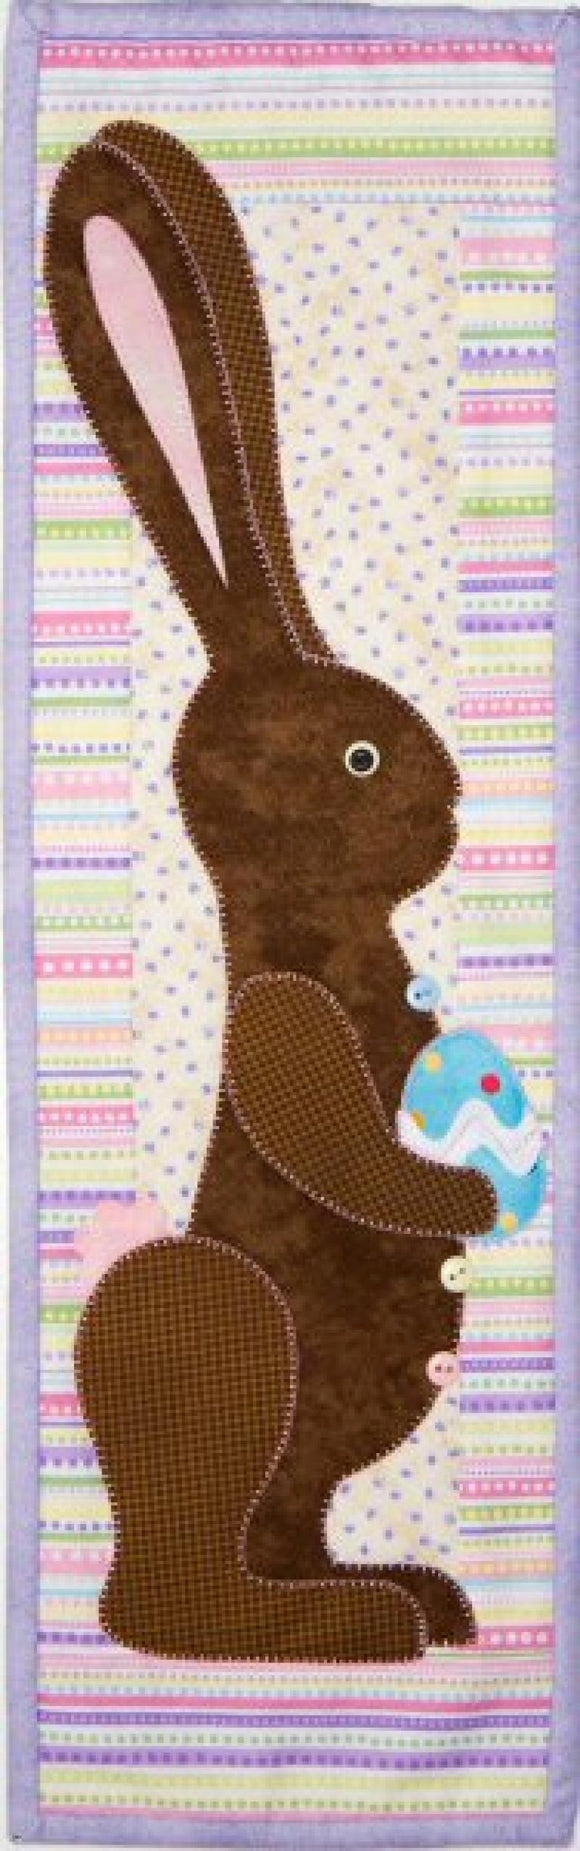 Chocolate Bunny Downloadable Pattern by Patch Abilities